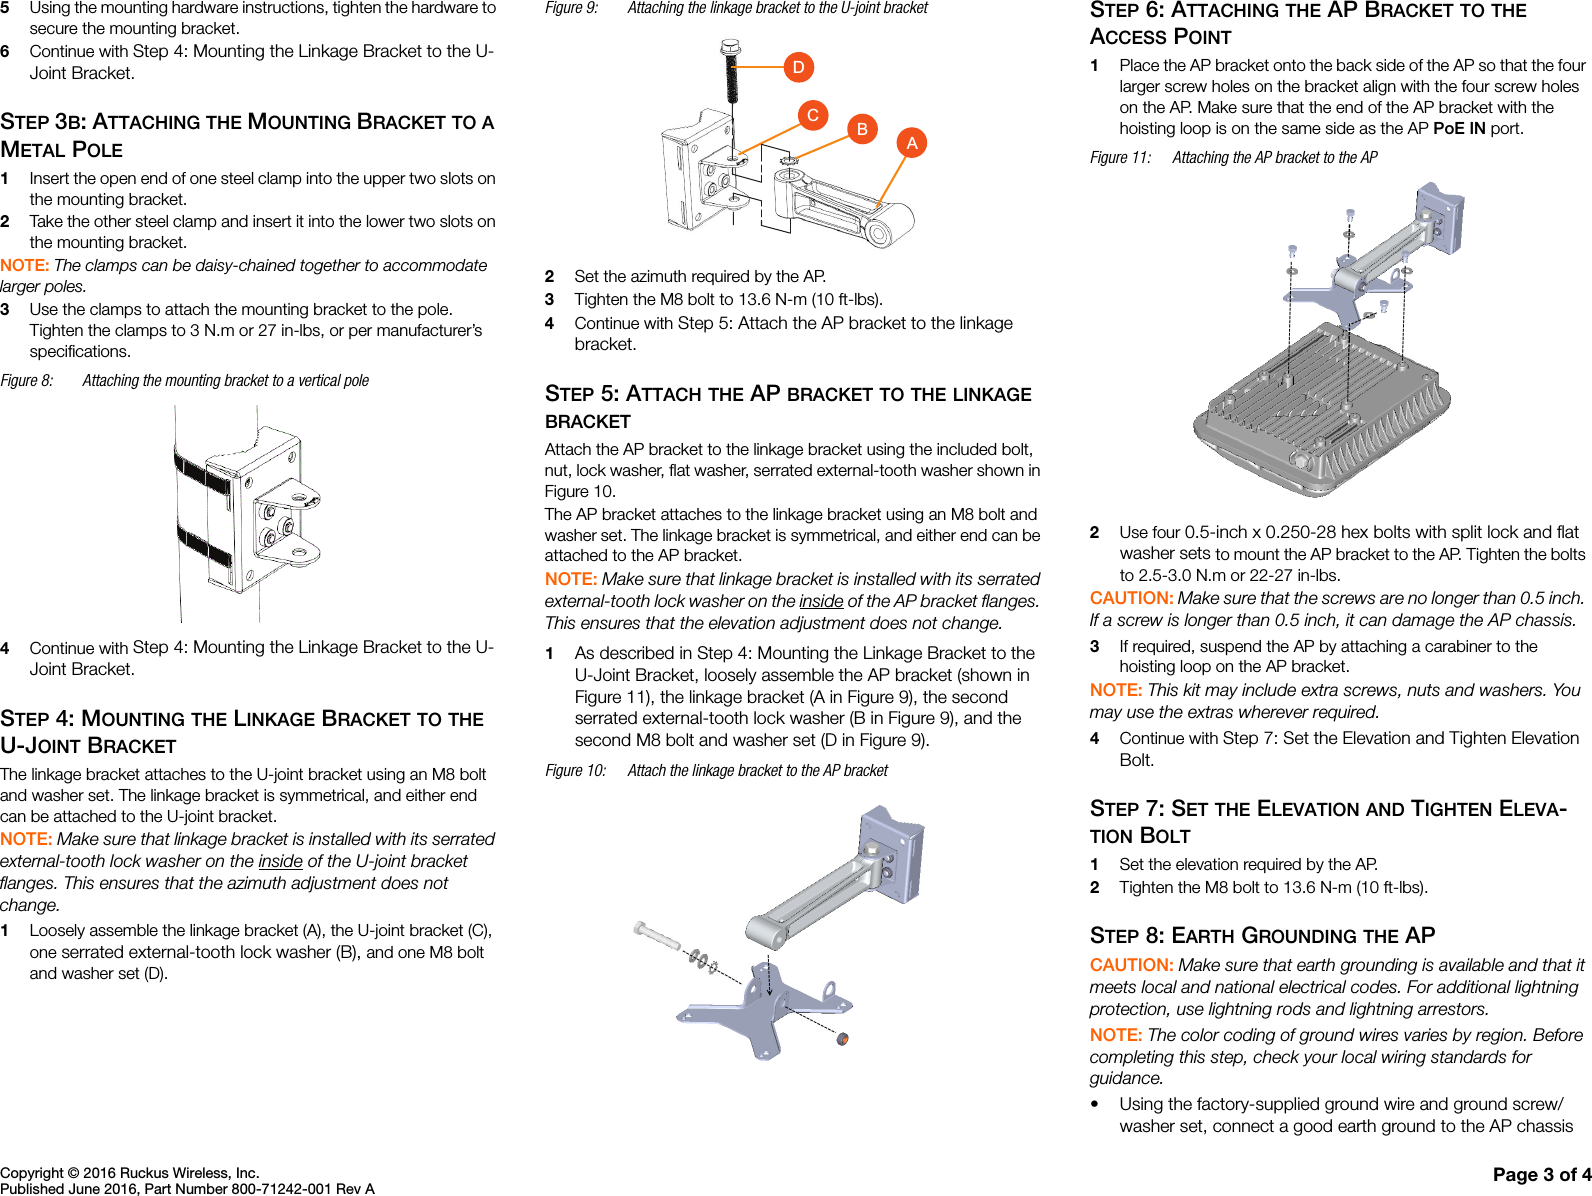 Copyright © 2016 Ruckus Wireless, Inc.Published June 2016, Part Number 800-71242-001 Rev A Page 3 of 45Using the mounting hardware instructions, tighten the hardware to secure the mounting bracket.6Continue with Step 4: Mounting the Linkage Bracket to the U-Joint Bracket.STEP 3B: ATTACHING THE MOUNTING BRACKET TO A METAL POLE1Insert the open end of one steel clamp into the upper two slots on the mounting bracket.2Take the other steel clamp and insert it into the lower two slots on the mounting bracket.NOTE: The clamps can be daisy-chained together to accommodate larger poles. 3Use the clamps to attach the mounting bracket to the pole. Tighten the clamps to 3 N.m or 27 in-lbs, or per manufacturer’s specifications.Figure 8: Attaching the mounting bracket to a vertical pole4Continue with Step 4: Mounting the Linkage Bracket to the U-Joint Bracket.STEP 4: MOUNTING THE LINKAGE BRACKET TO THE U-JOINT BRACKETThe linkage bracket attaches to the U-joint bracket using an M8 bolt and washer set. The linkage bracket is symmetrical, and either end can be attached to the U-joint bracket. NOTE: Make sure that linkage bracket is installed with its serrated external-tooth lock washer on the inside of the U-joint bracket flanges. This ensures that the azimuth adjustment does not change.1Loosely assemble the linkage bracket (A), the U-joint bracket (C), one serrated external-tooth lock washer (B), and one M8 bolt and washer set (D). Figure 9: Attaching the linkage bracket to the U-joint bracket2Set the azimuth required by the AP.3Tighten the M8 bolt to 13.6 N-m (10 ft-lbs).4Continue with Step 5: Attach the AP bracket to the linkage bracket.STEP 5: ATTACH THE AP BRACKET TO THE LINKAGE BRACKETAttach the AP bracket to the linkage bracket using the included bolt, nut, lock washer, flat washer, serrated external-tooth washer shown in Figure 10. The AP bracket attaches to the linkage bracket using an M8 bolt and washer set. The linkage bracket is symmetrical, and either end can be attached to the AP bracket. NOTE: Make sure that linkage bracket is installed with its serrated external-tooth lock washer on the inside of the AP bracket flanges. This ensures that the elevation adjustment does not change.1As described in Step 4: Mounting the Linkage Bracket to the U-Joint Bracket, loosely assemble the AP bracket (shown in Figure 11), the linkage bracket (A in Figure 9), the second serrated external-tooth lock washer (B in Figure 9), and the second M8 bolt and washer set (D in Figure 9). Figure 10: Attach the linkage bracket to the AP bracketSTEP 6: ATTACHING THE AP BRACKET TO THE ACCESS POINT1Place the AP bracket onto the back side of the AP so that the four larger screw holes on the bracket align with the four screw holes on the AP. Make sure that the end of the AP bracket with the hoisting loop is on the same side as the AP PoE IN port.Figure 11: Attaching the AP bracket to the AP2Use four 0.5-inch x 0.250-28 hex bolts with split lock and flat washer sets to mount the AP bracket to the AP. Tighten the bolts to 2.5-3.0 N.m or 22-27 in-lbs.CAUTION: Make sure that the screws are no longer than 0.5 inch. If a screw is longer than 0.5 inch, it can damage the AP chassis. 3If required, suspend the AP by attaching a carabiner to the hoisting loop on the AP bracket.NOTE: This kit may include extra screws, nuts and washers. You may use the extras wherever required.4Continue with Step 7: Set the Elevation and Tighten Elevation Bolt.STEP 7: SET THE ELEVATION AND TIGHTEN ELEVA-TION BOLT1Set the elevation required by the AP.2Tighten the M8 bolt to 13.6 N-m (10 ft-lbs).STEP 8: EARTH GROUNDING THE APCAUTION: Make sure that earth grounding is available and that it meets local and national electrical codes. For additional lightning protection, use lightning rods and lightning arrestors.NOTE: The color coding of ground wires varies by region. Before completing this step, check your local wiring standards for guidance.• Using the factory-supplied ground wire and ground screw/washer set, connect a good earth ground to the AP chassis ACBD